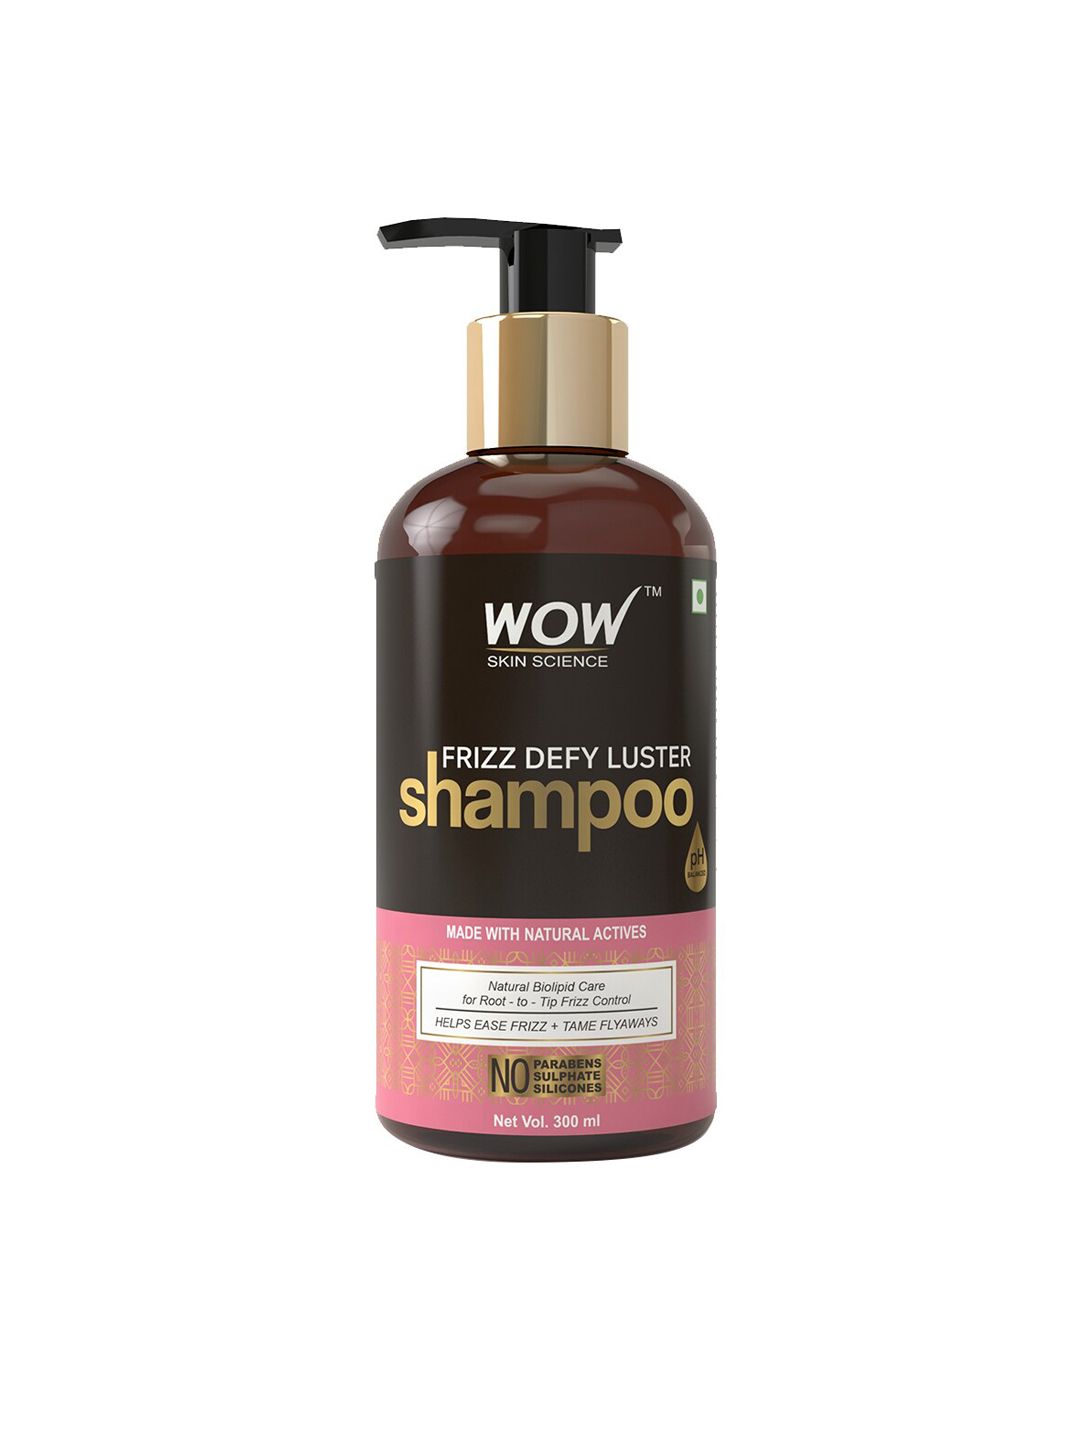 WOW Unisex Skin Science Frizz Defy Luster No Parabens, Sulphate & Silicone Shampoo 100 ml Price in India